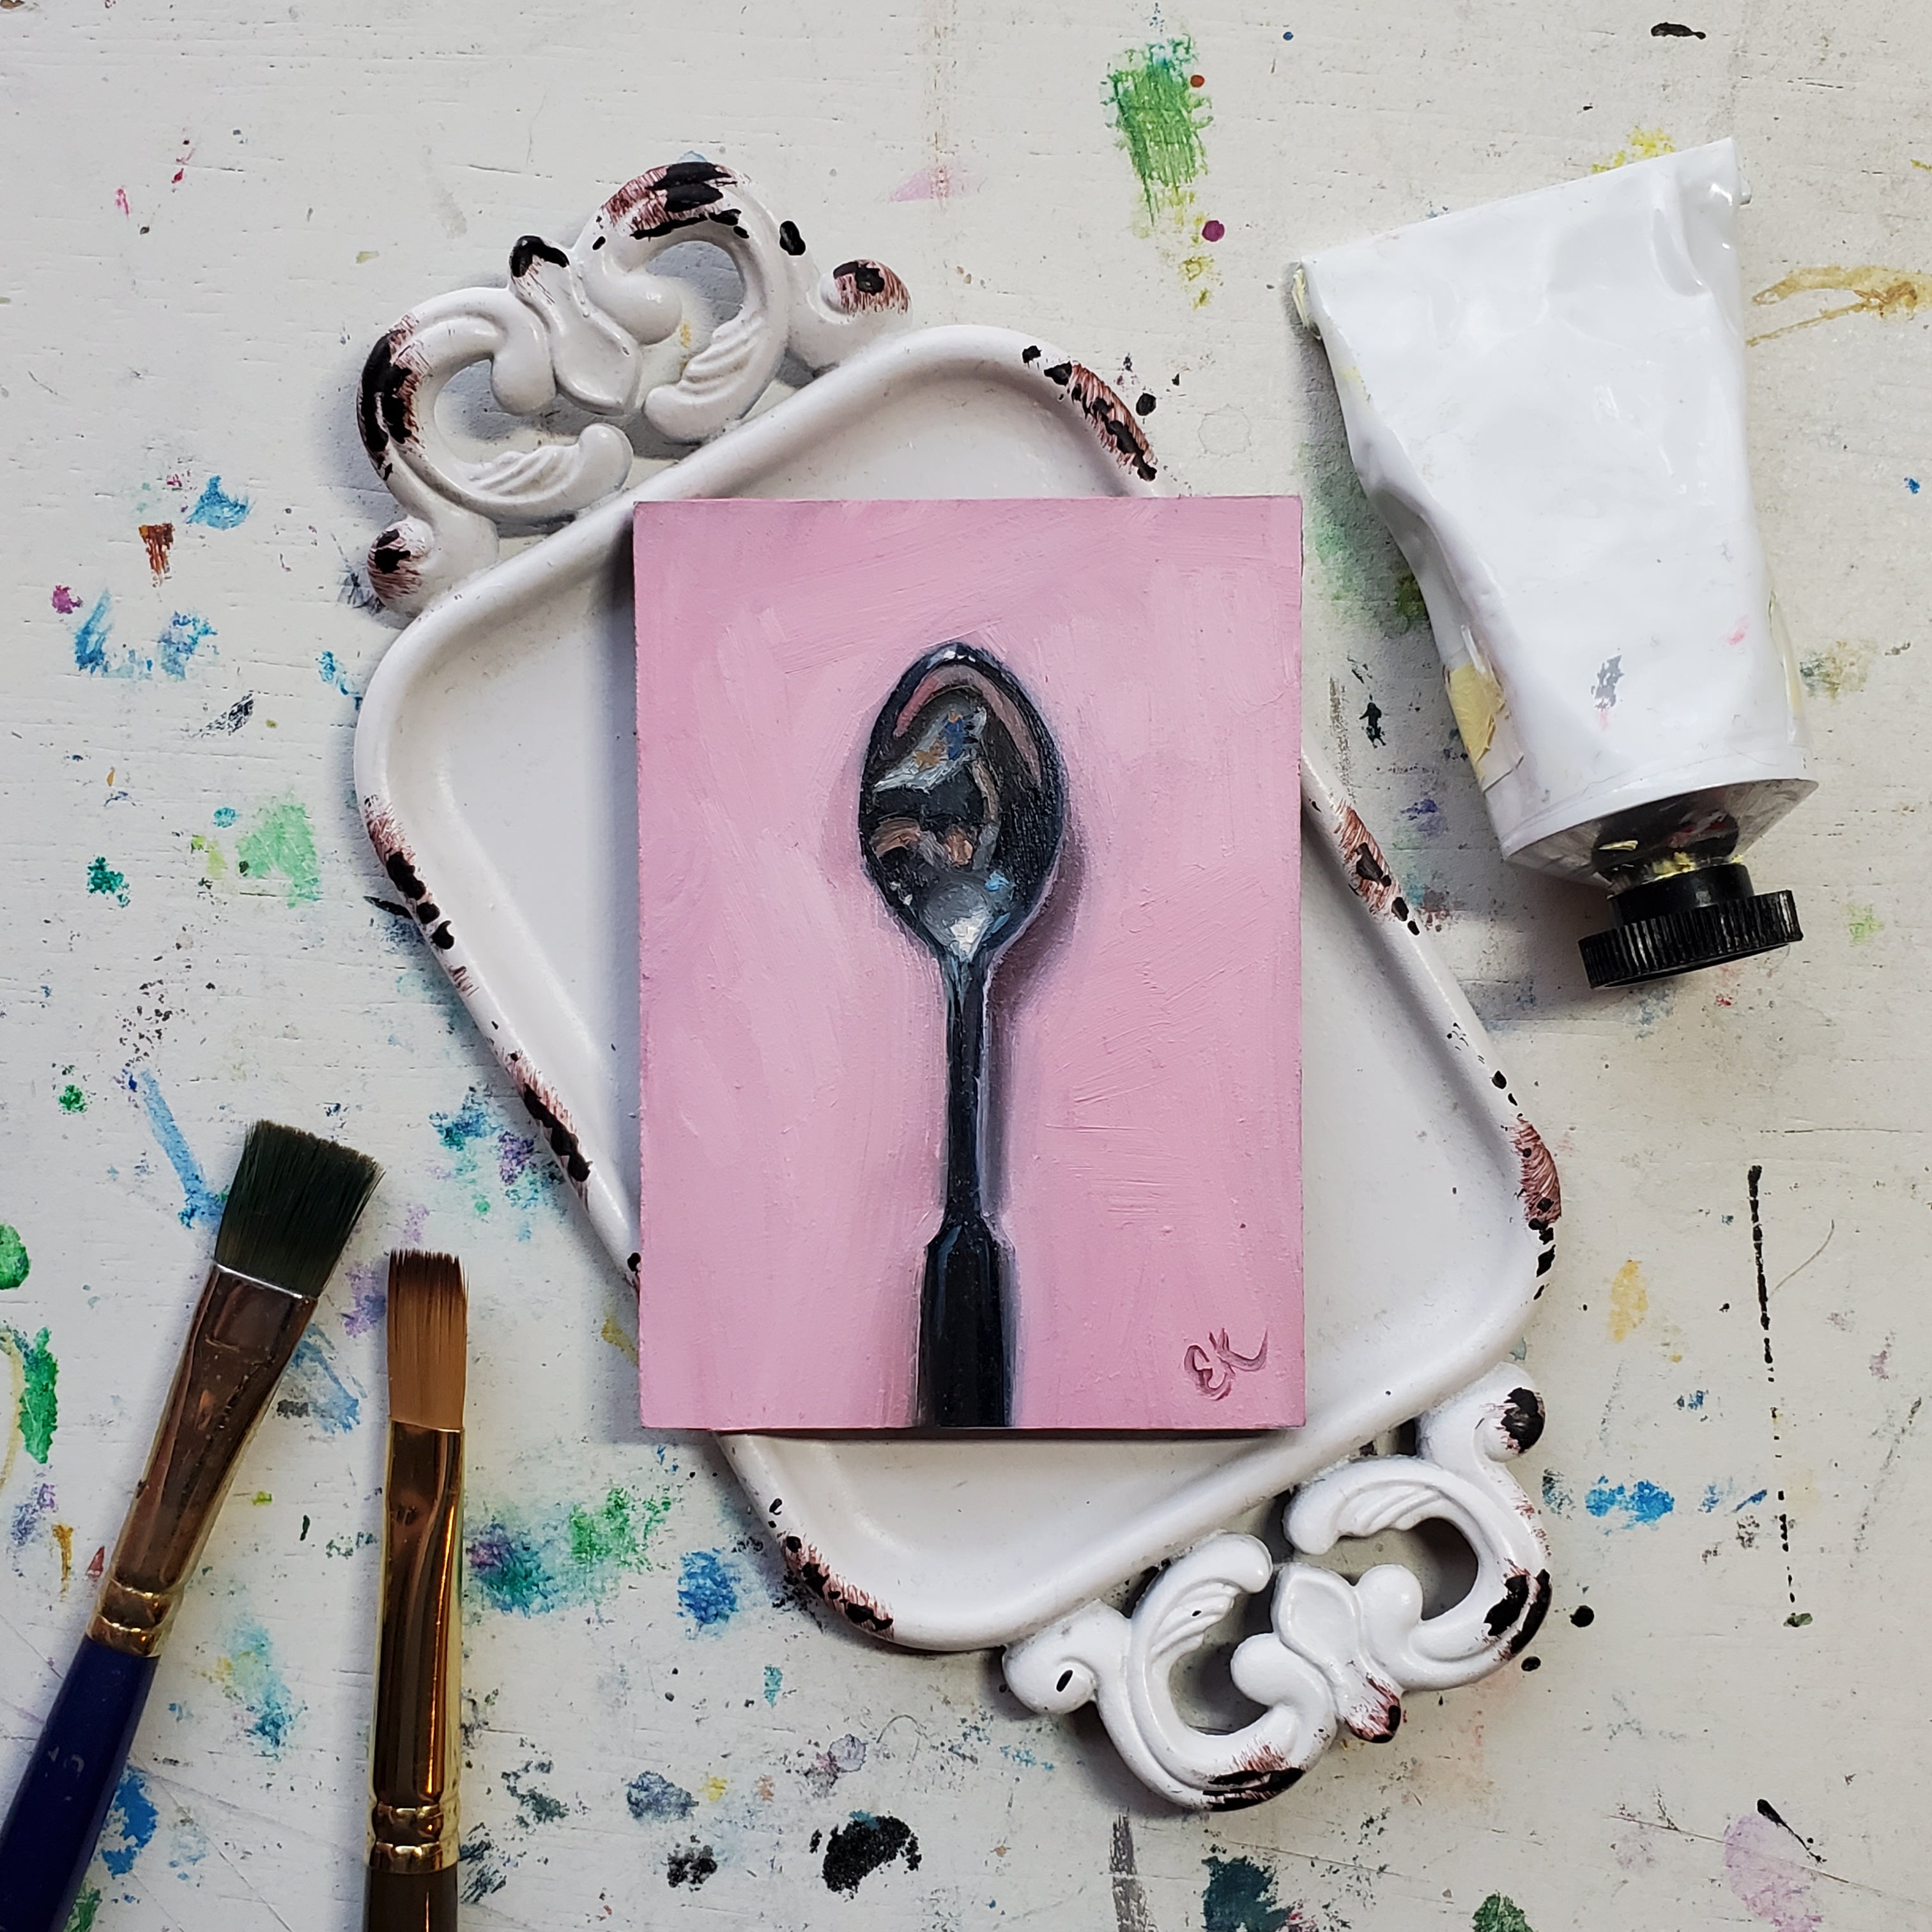 Pink Spoon || Mini Oil Painting on Panel || Display Easel Included